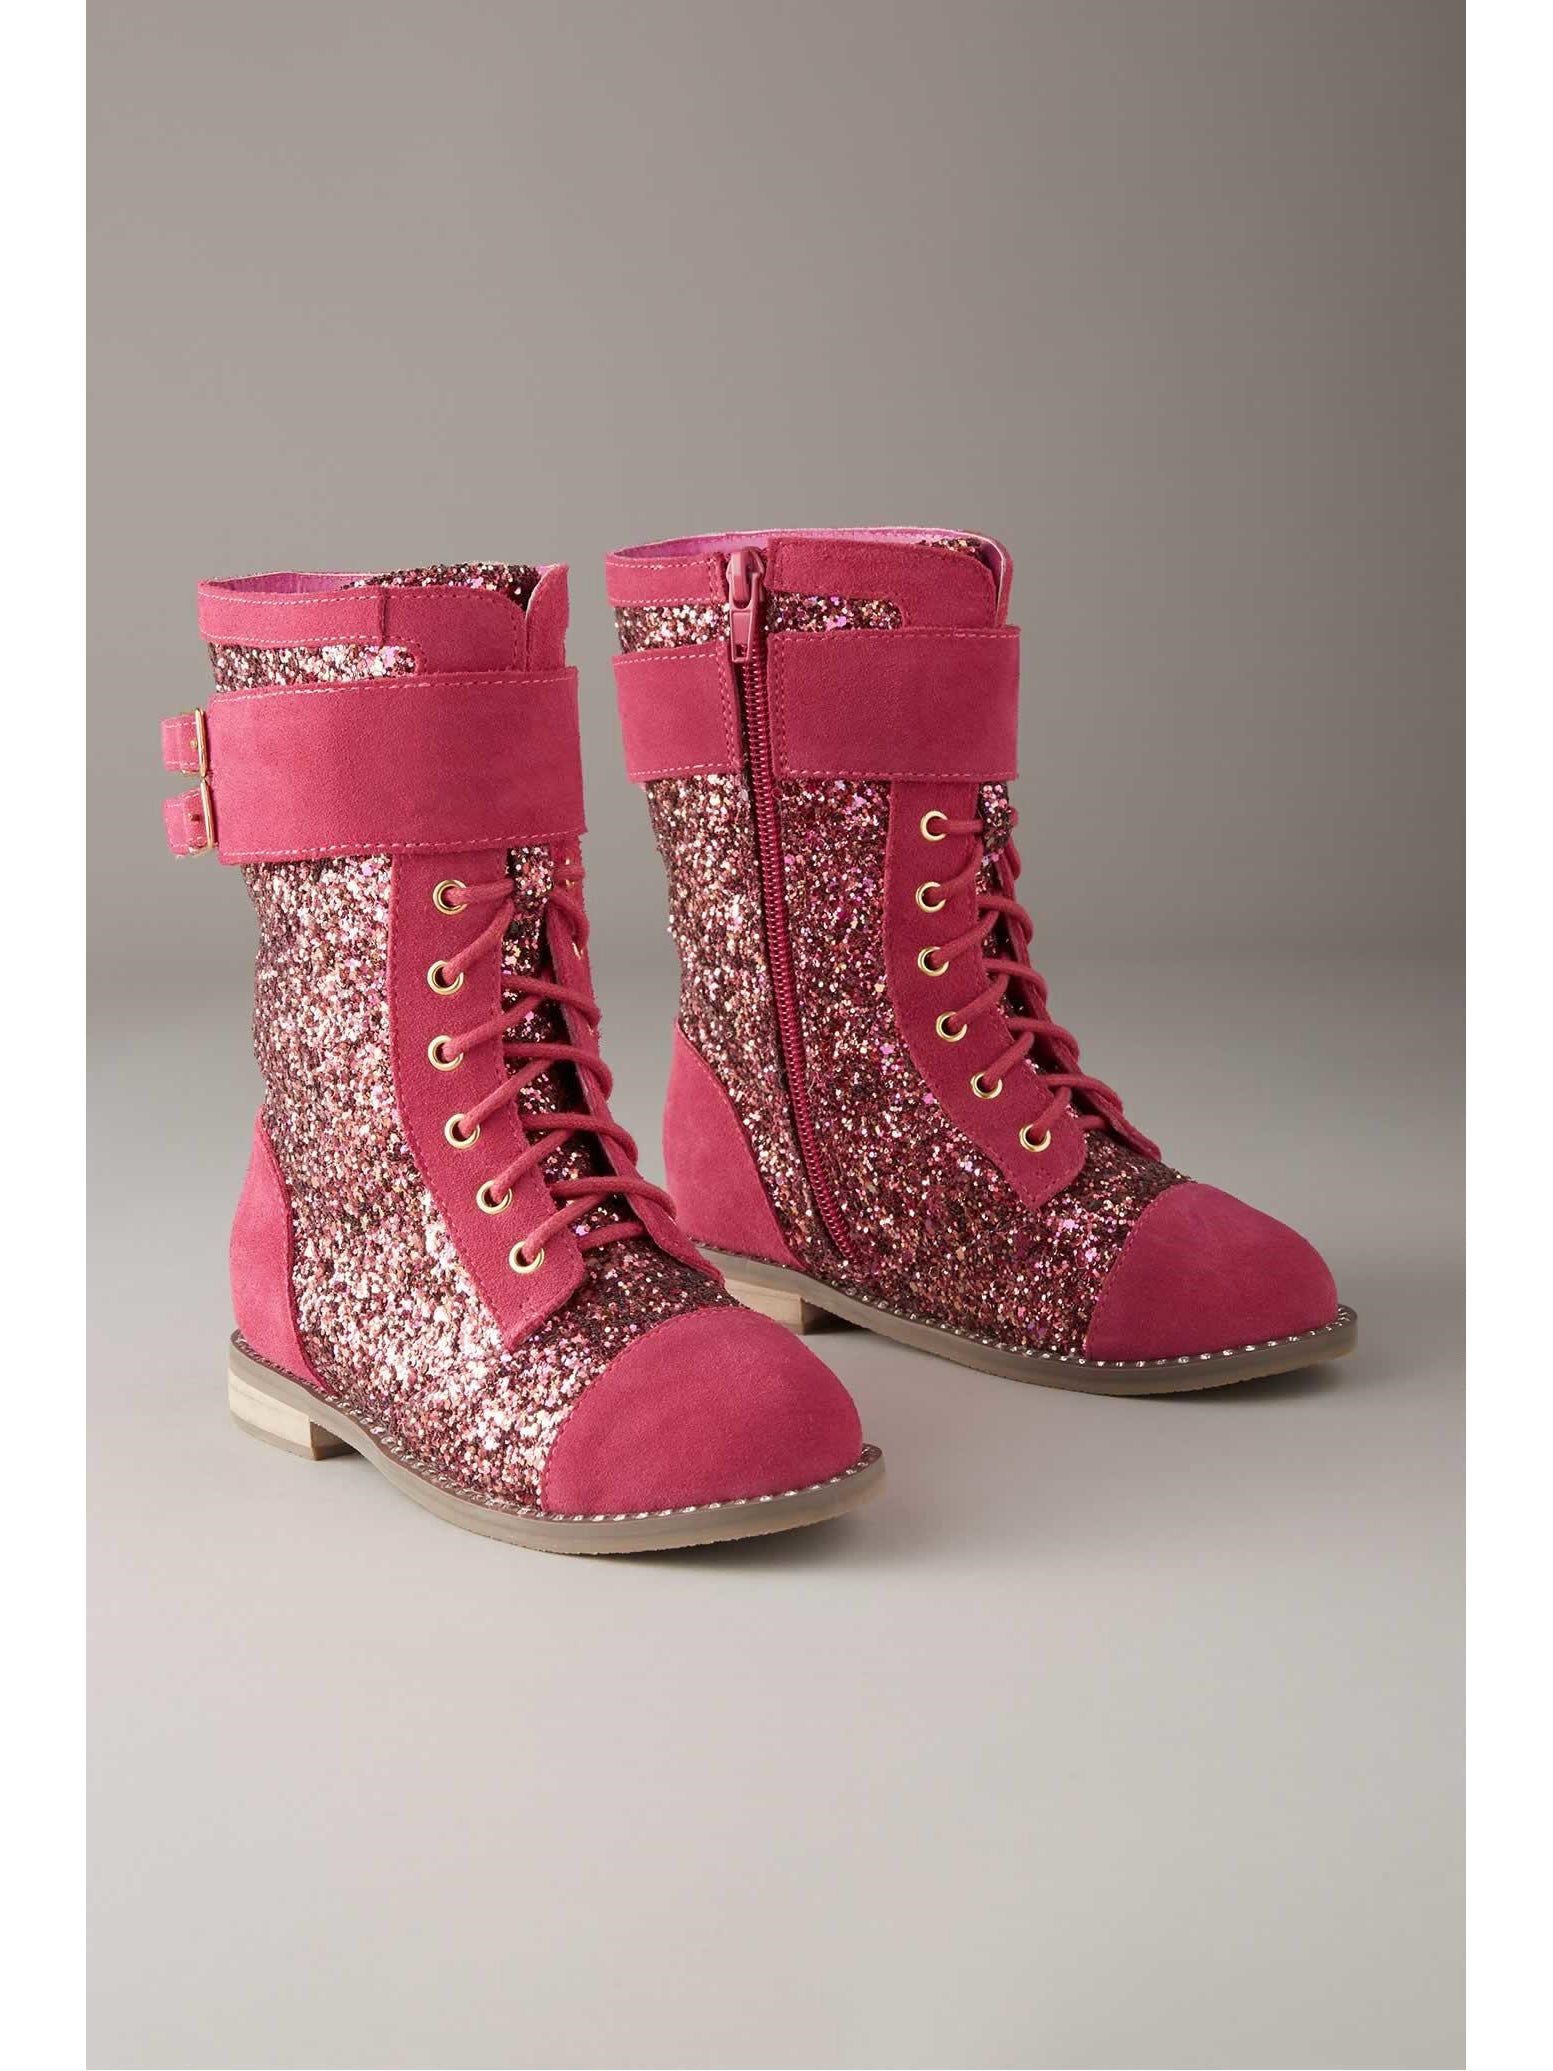 red glitter combat boots